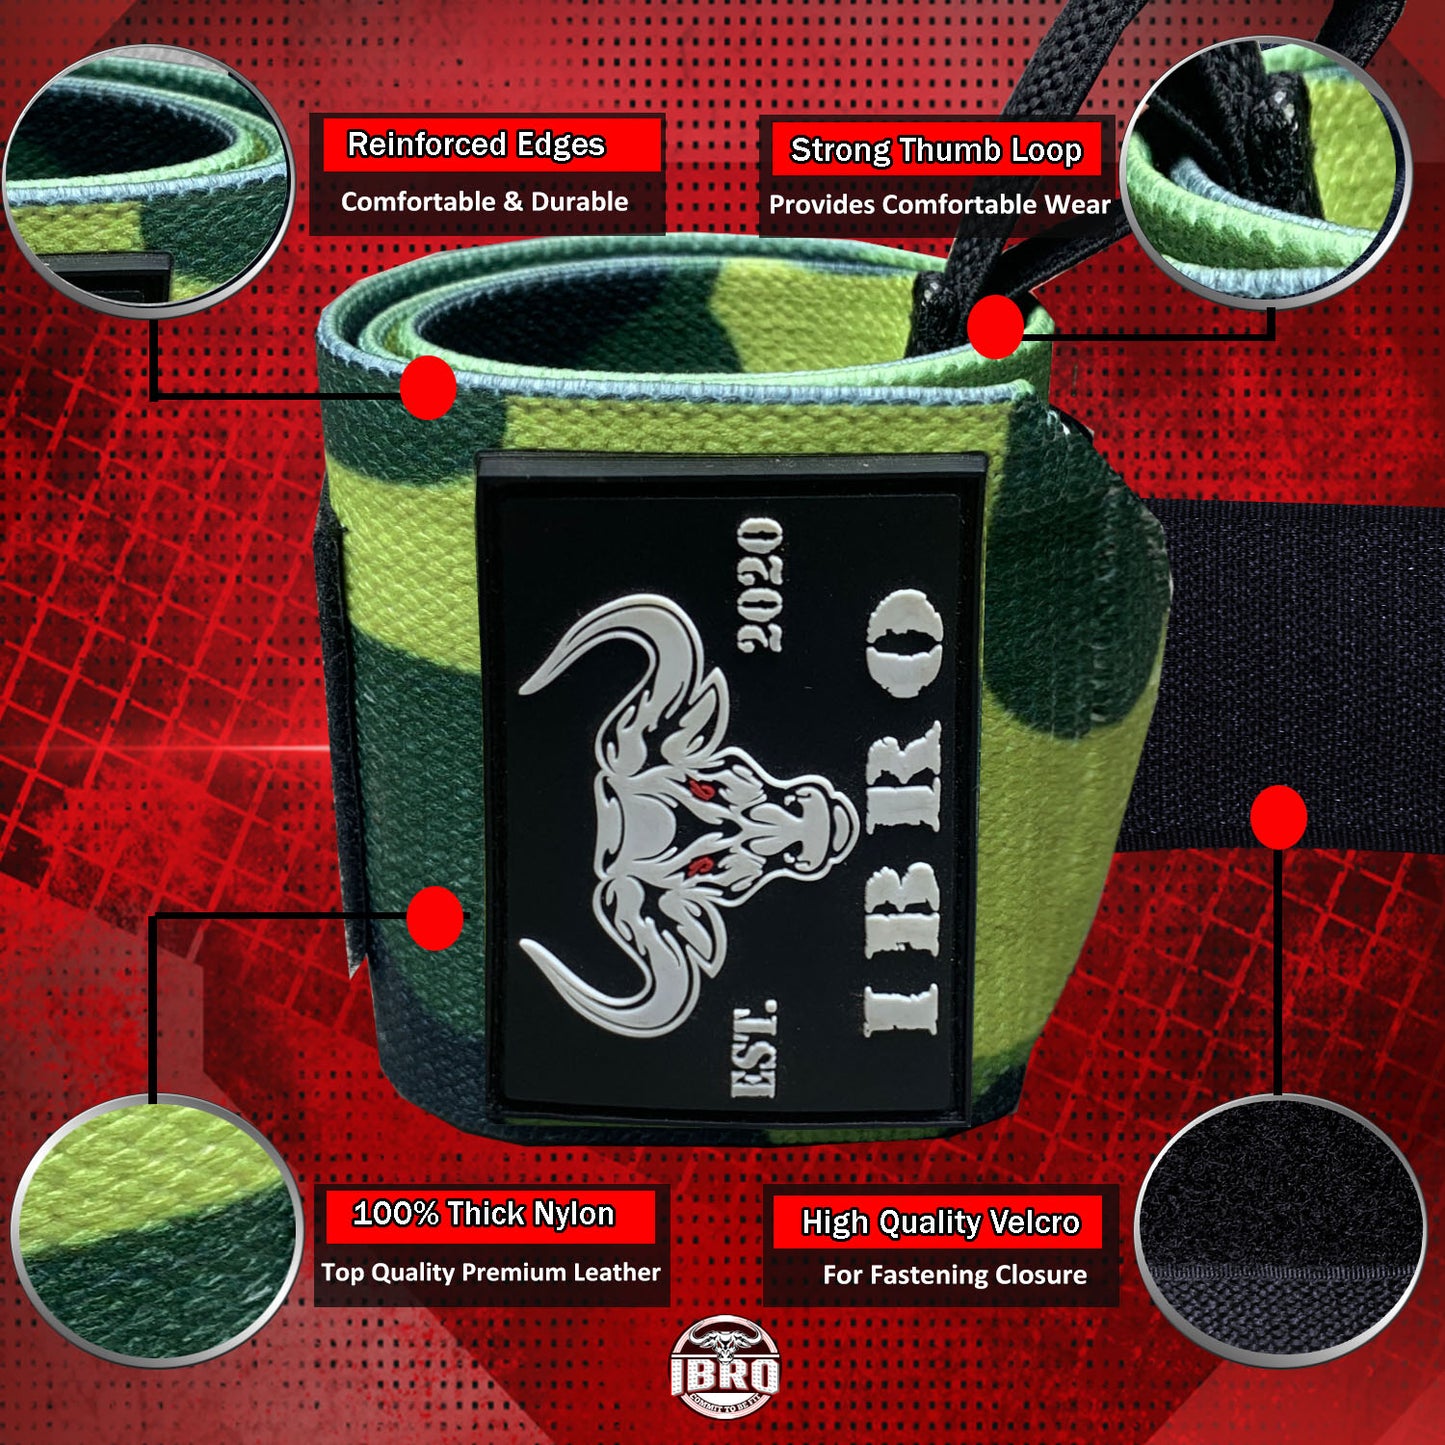 IBRO Weightlifting Wrist Wraps, 24” Premium Wrist Support, Avoid Injury, Best Wrap for Powerlifting, Weightlifting, Gym Workouts, Strength Training, Cross Training for Men & Women Green Camo